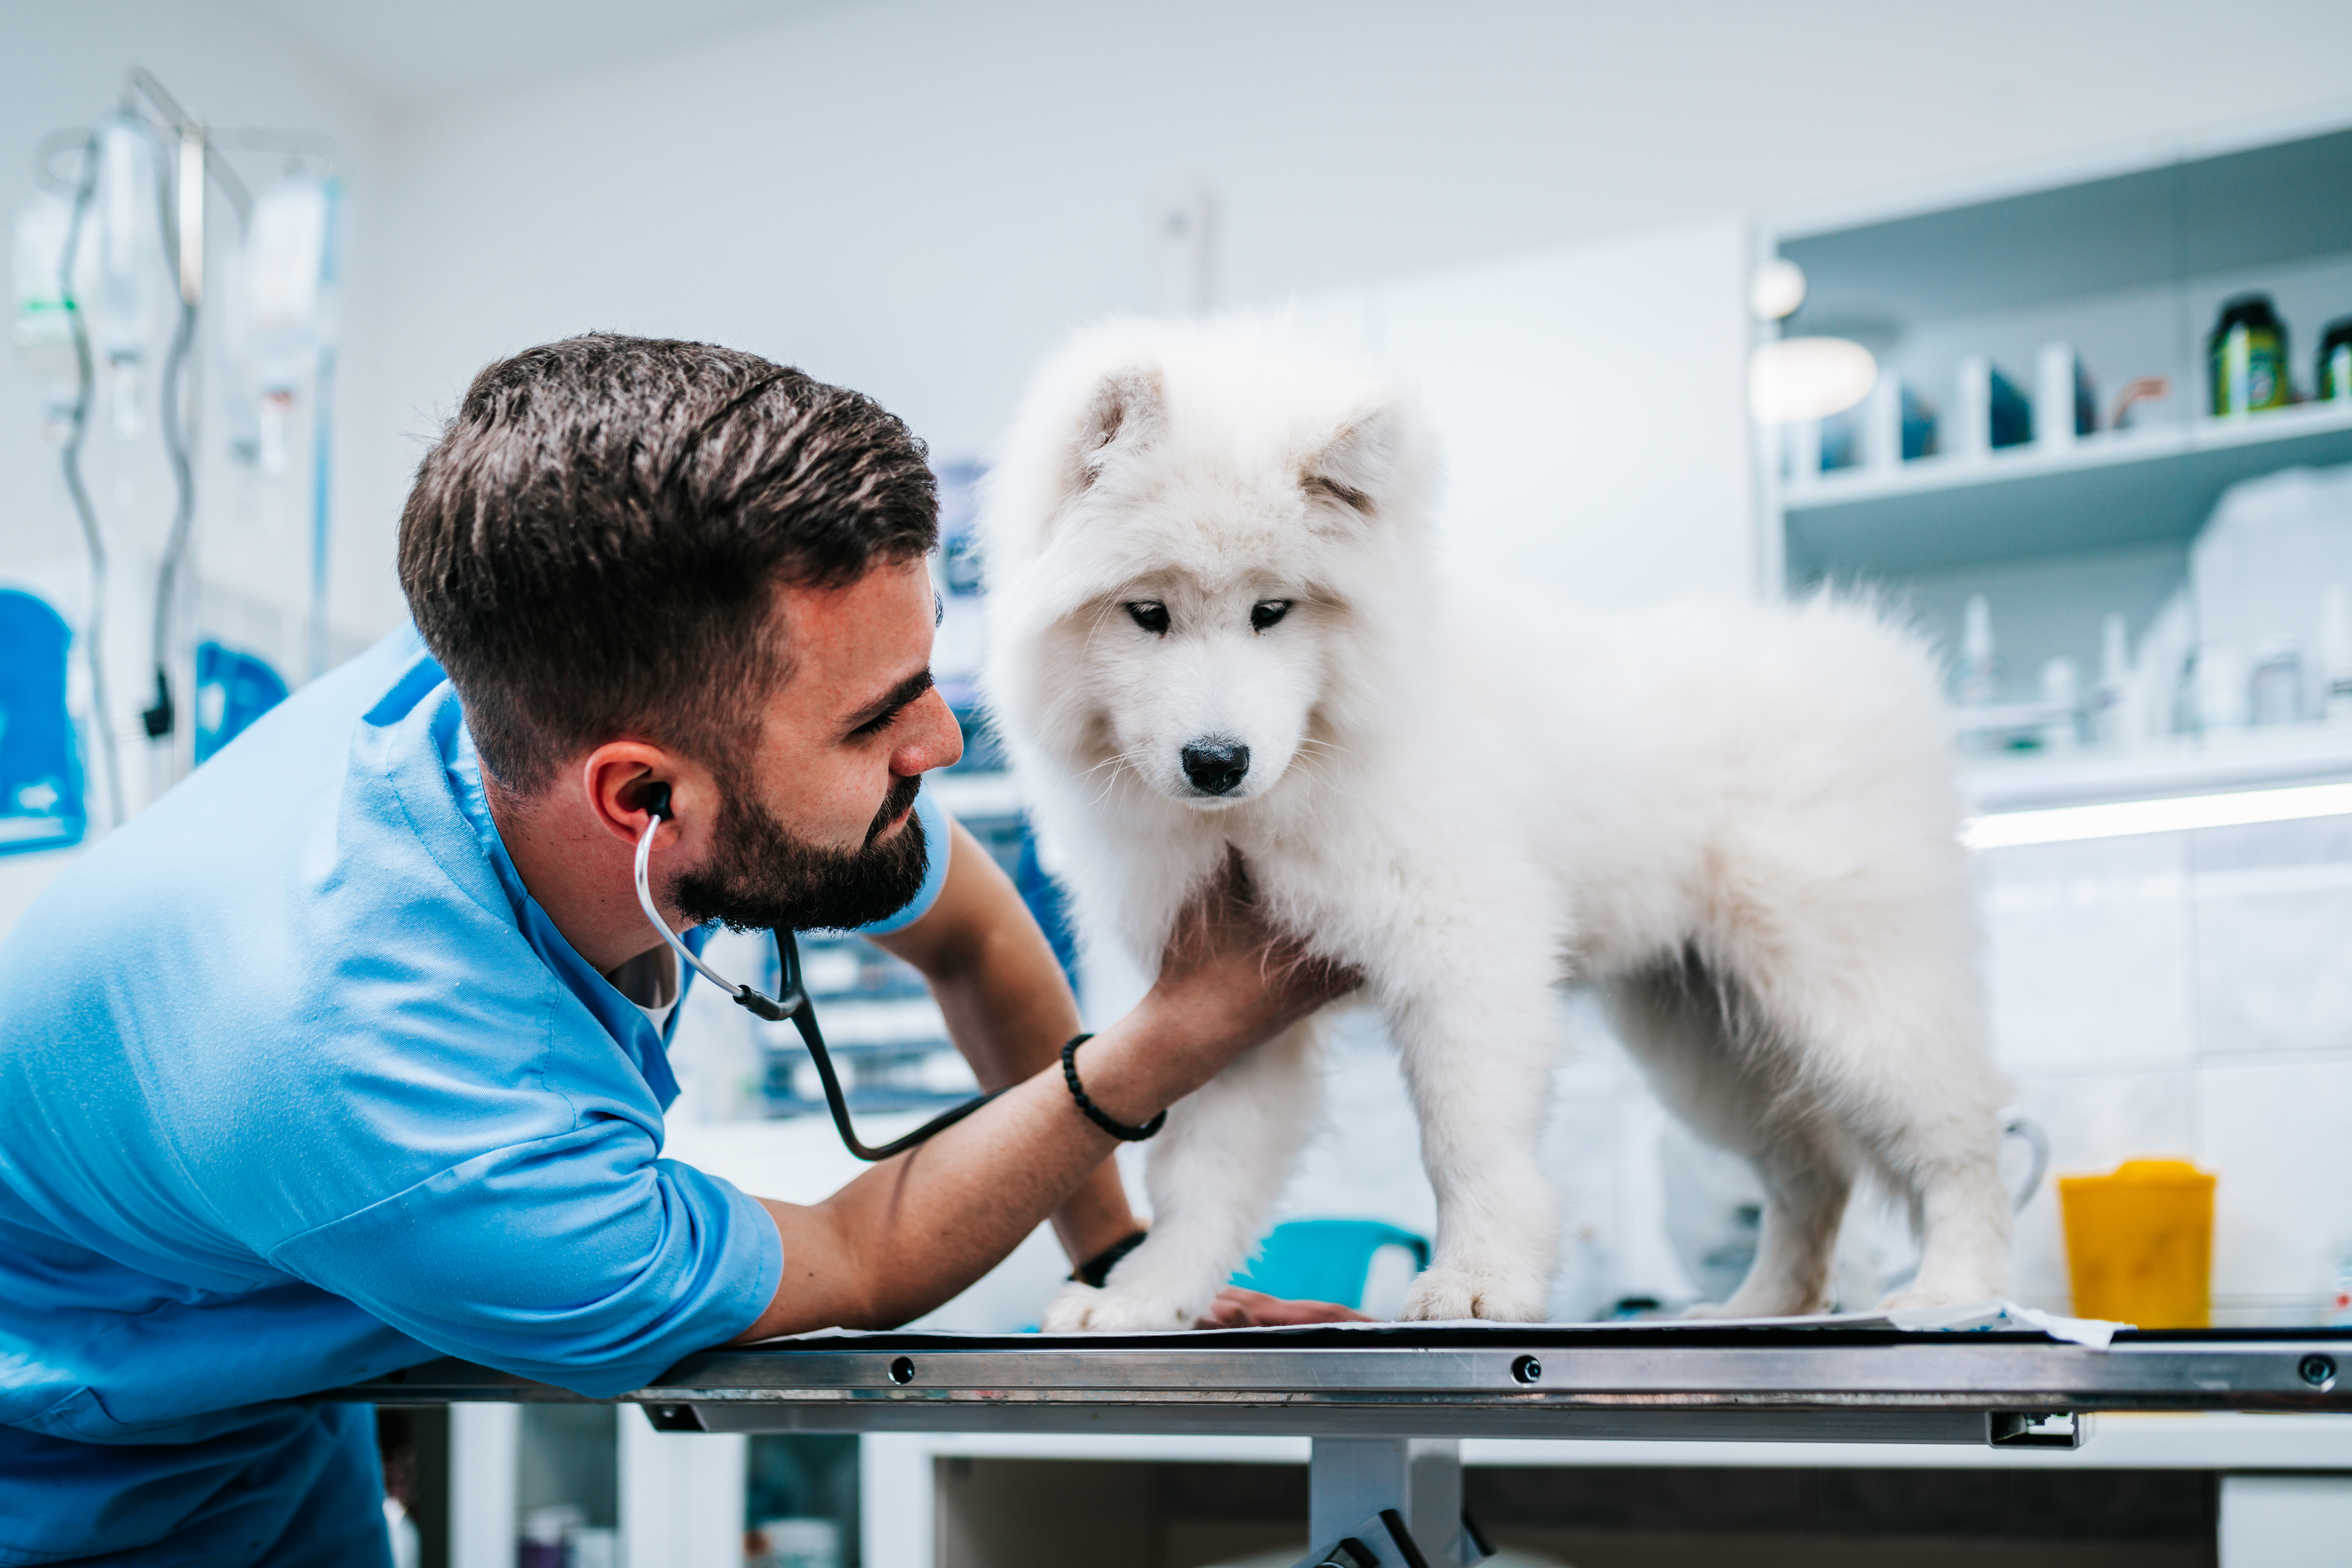 Working as a Vet in the UAE